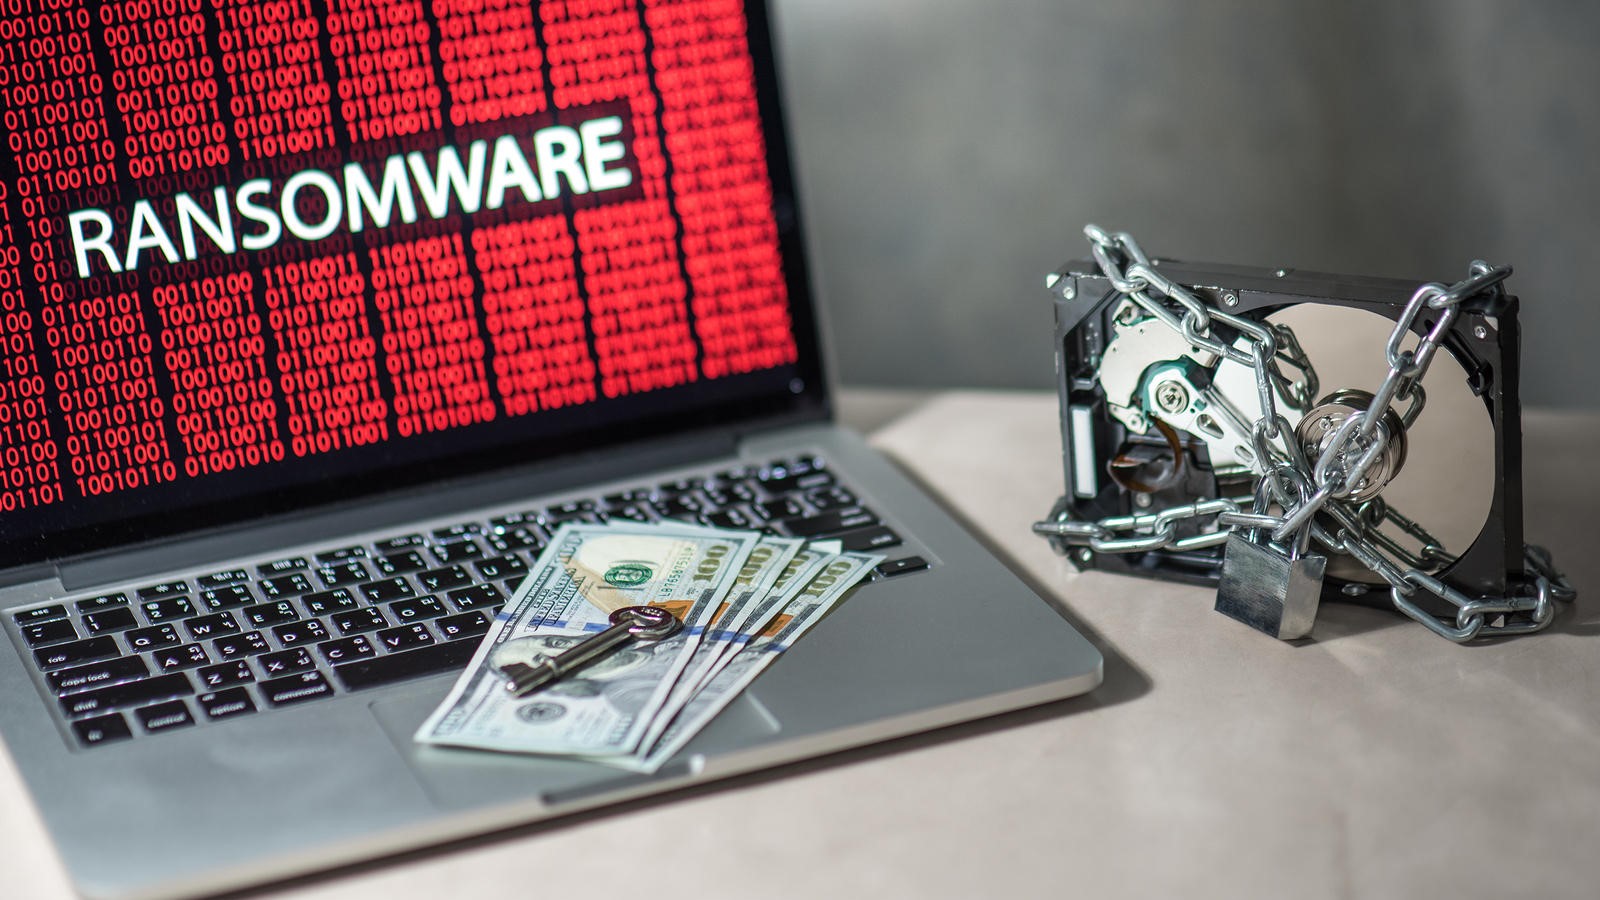 Learn how to permanently eliminate the ransomware virus from your PC